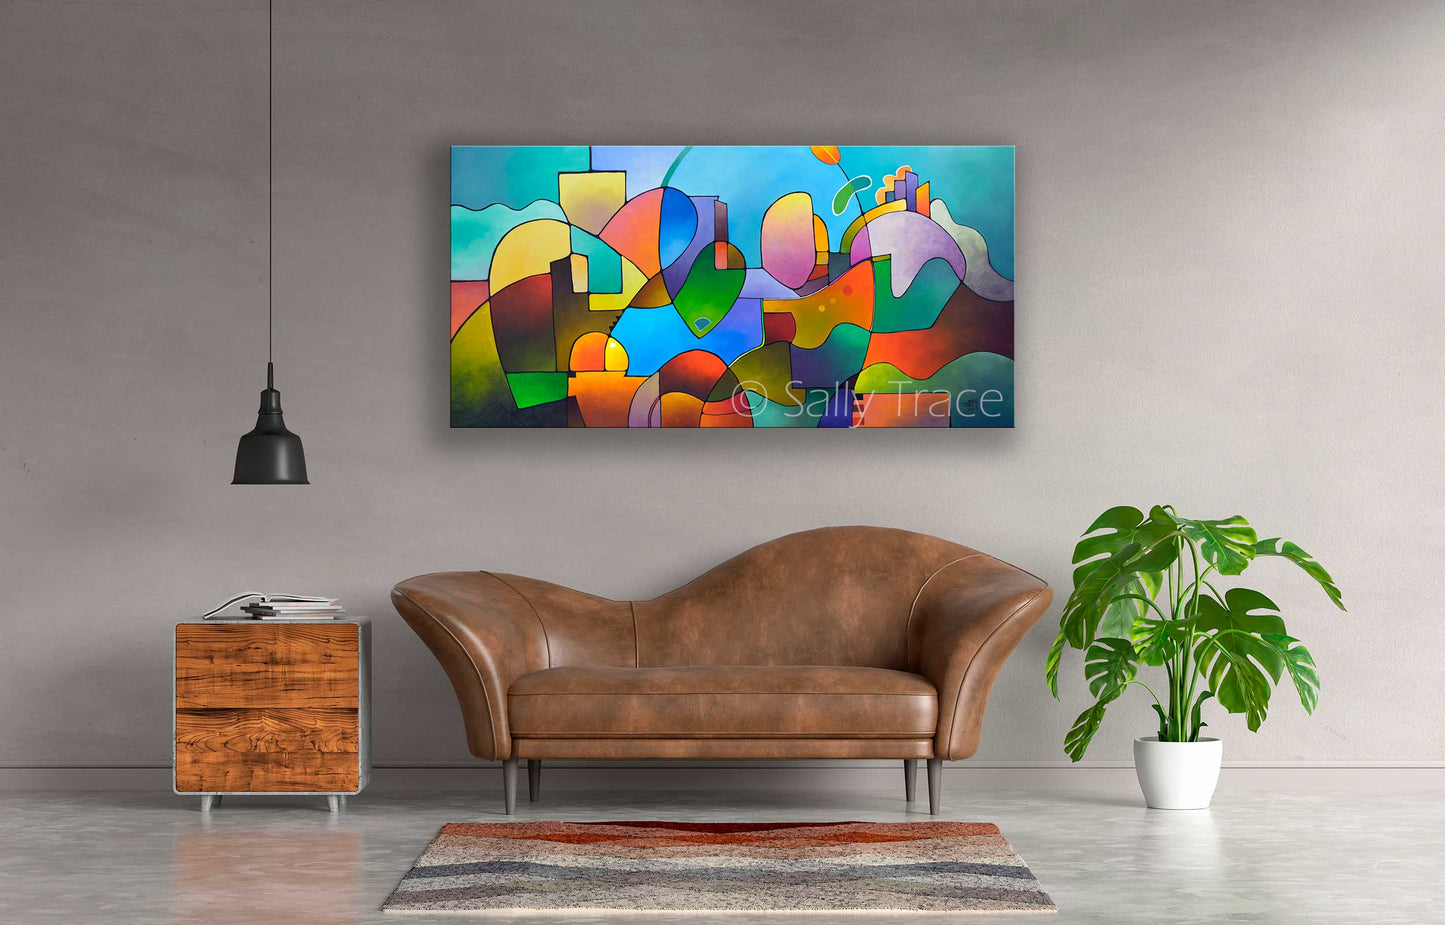 “Diversification” abstract landscape fine art prints, contemporary modern geometric colorful abstract art prints, geometric abstract wall art prints by Sally Trace, room view